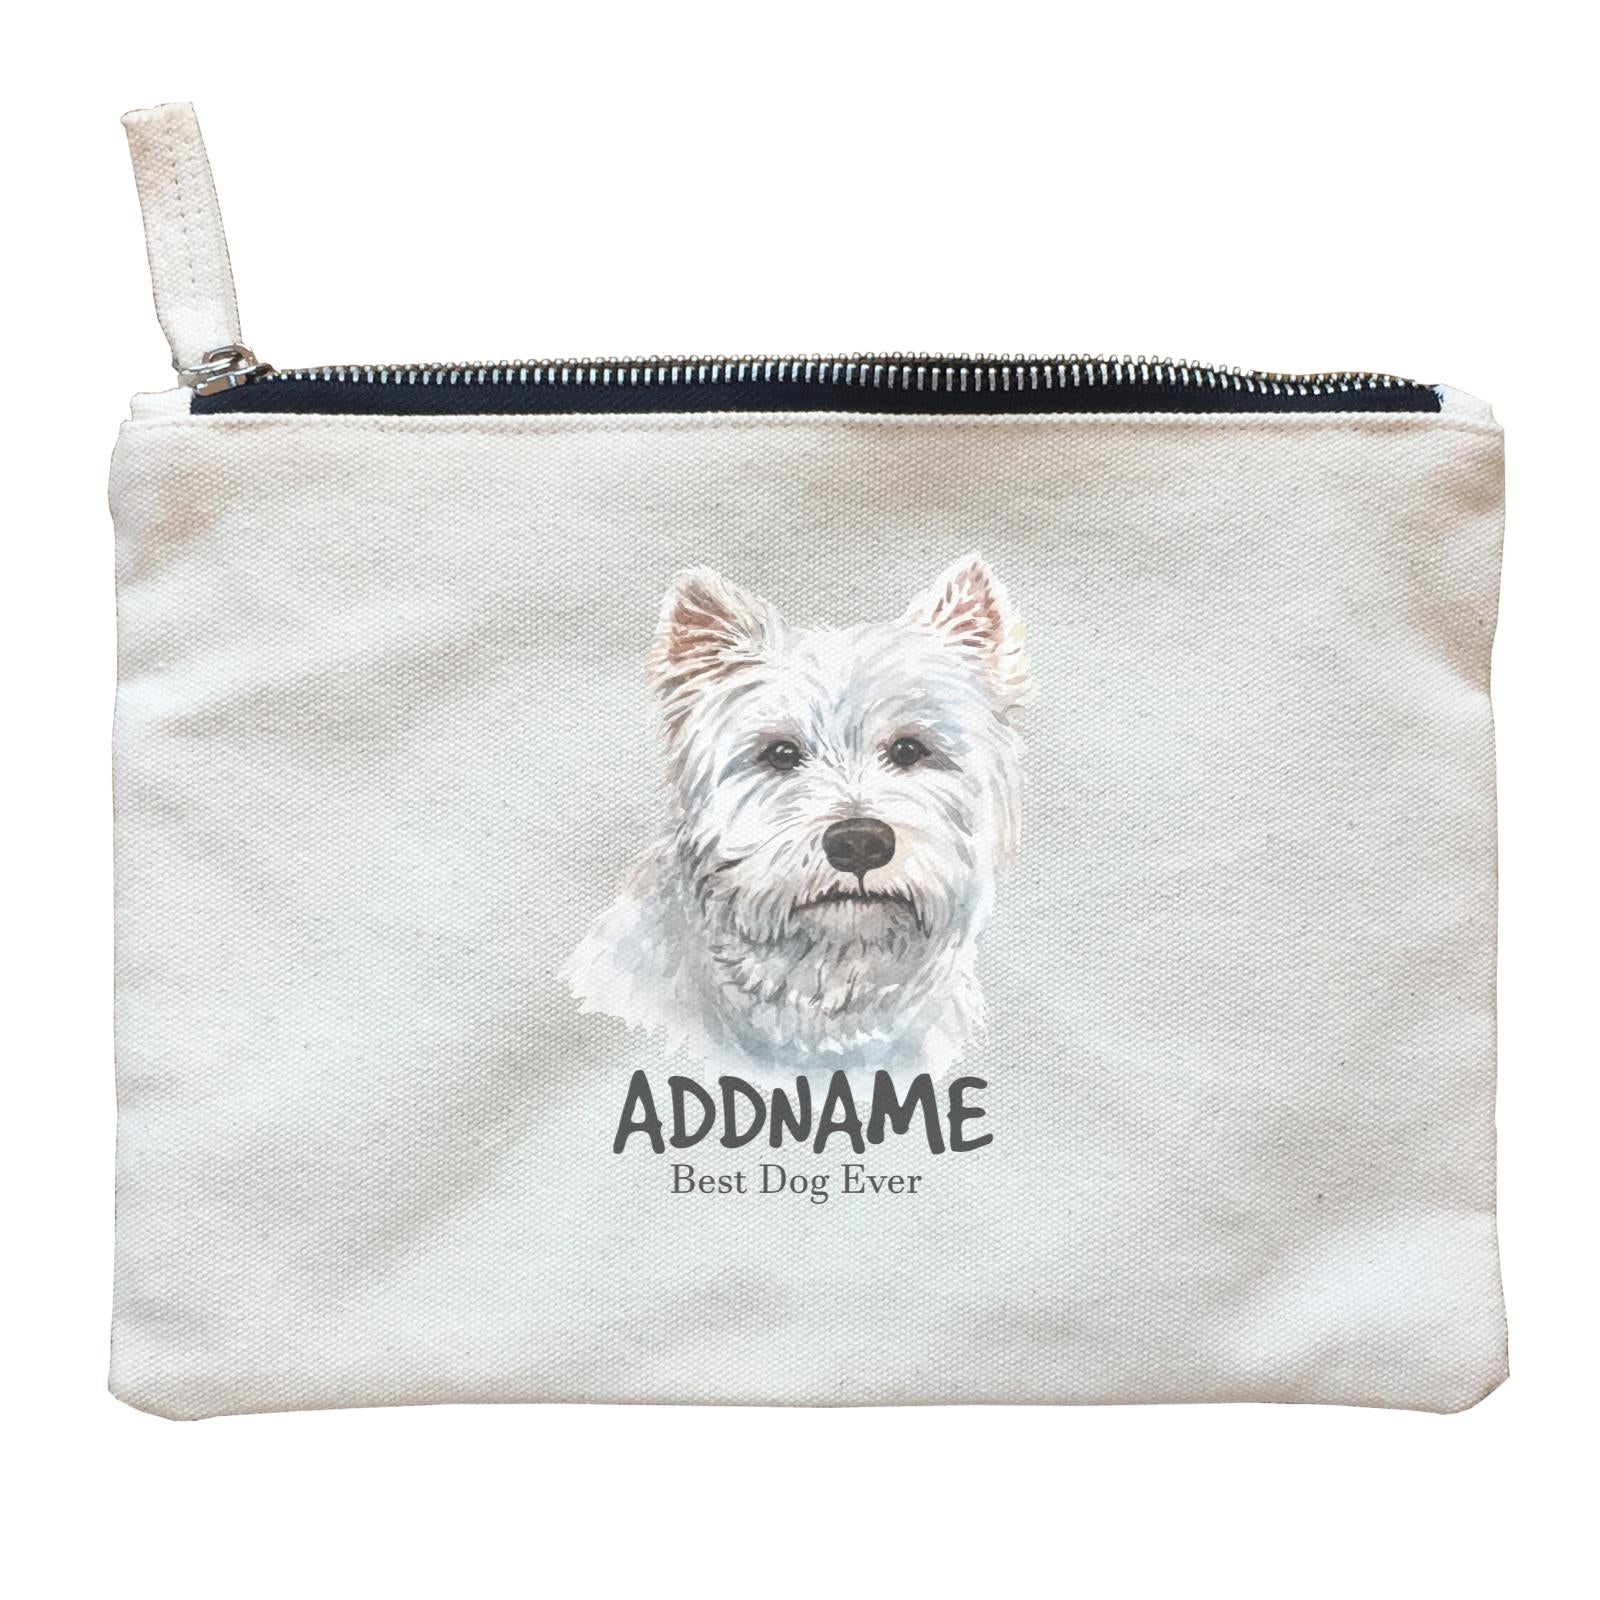 Watercolor Dog West Highland White Terrier Best Dog Ever Addname Zipper Pouch